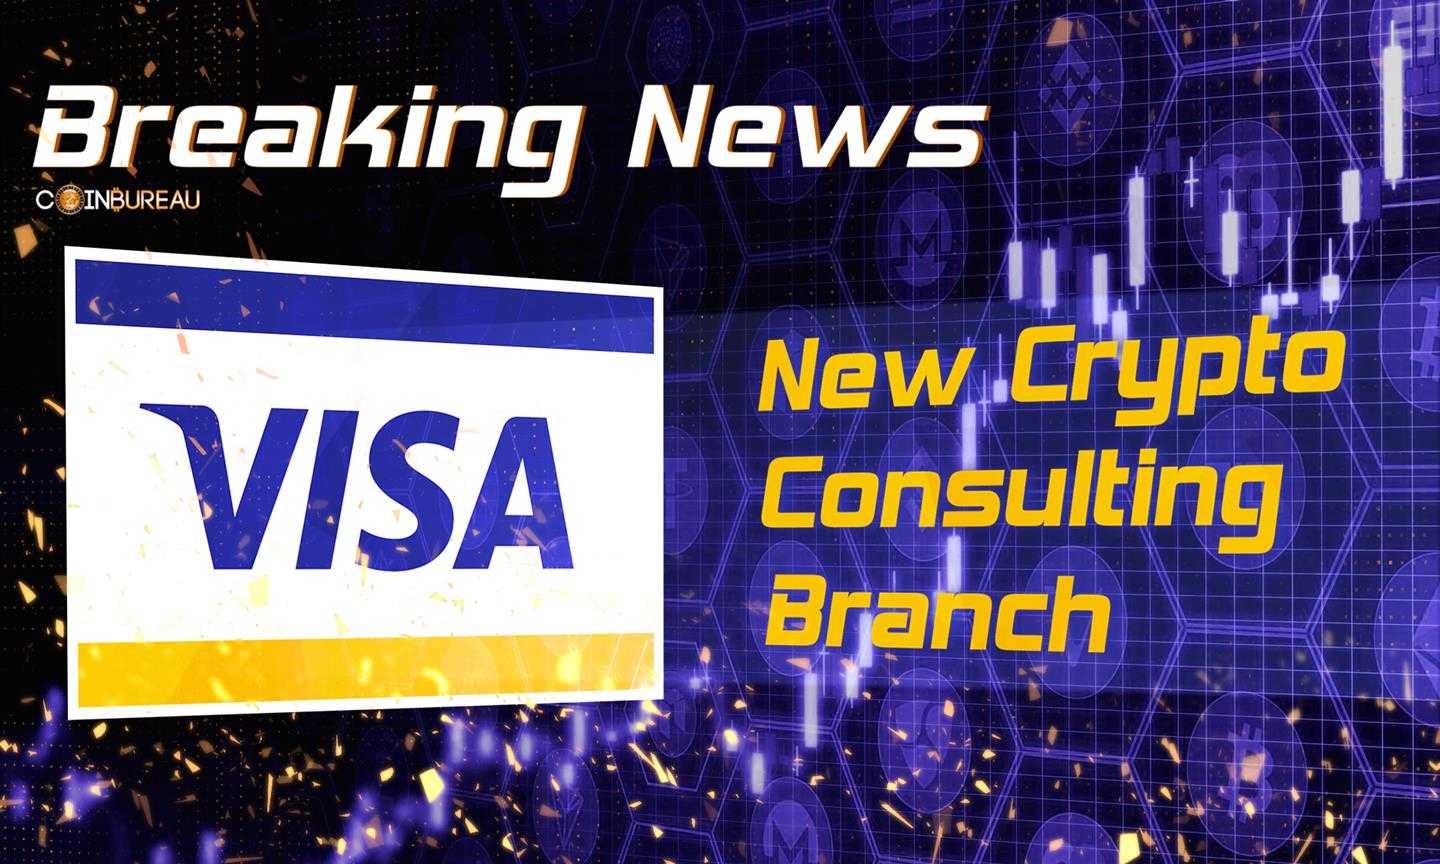 Visa Launches New Crypto Consulting Branch Amid Surging Interest